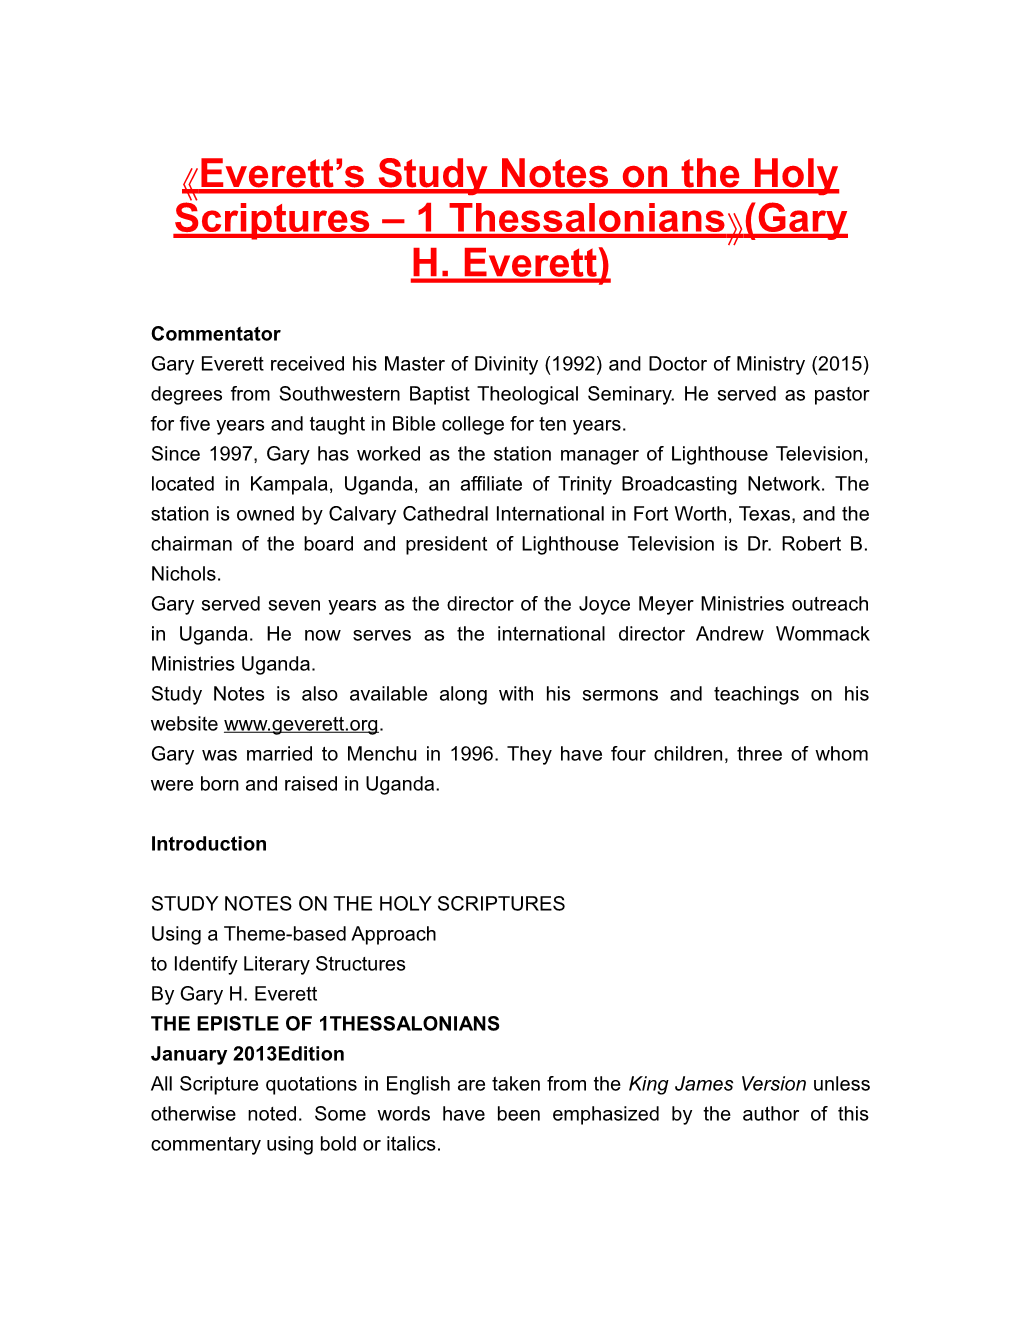 Everett S Study Notes on the Holy Scriptures 1 Thessalonians (Gary H. Everett)